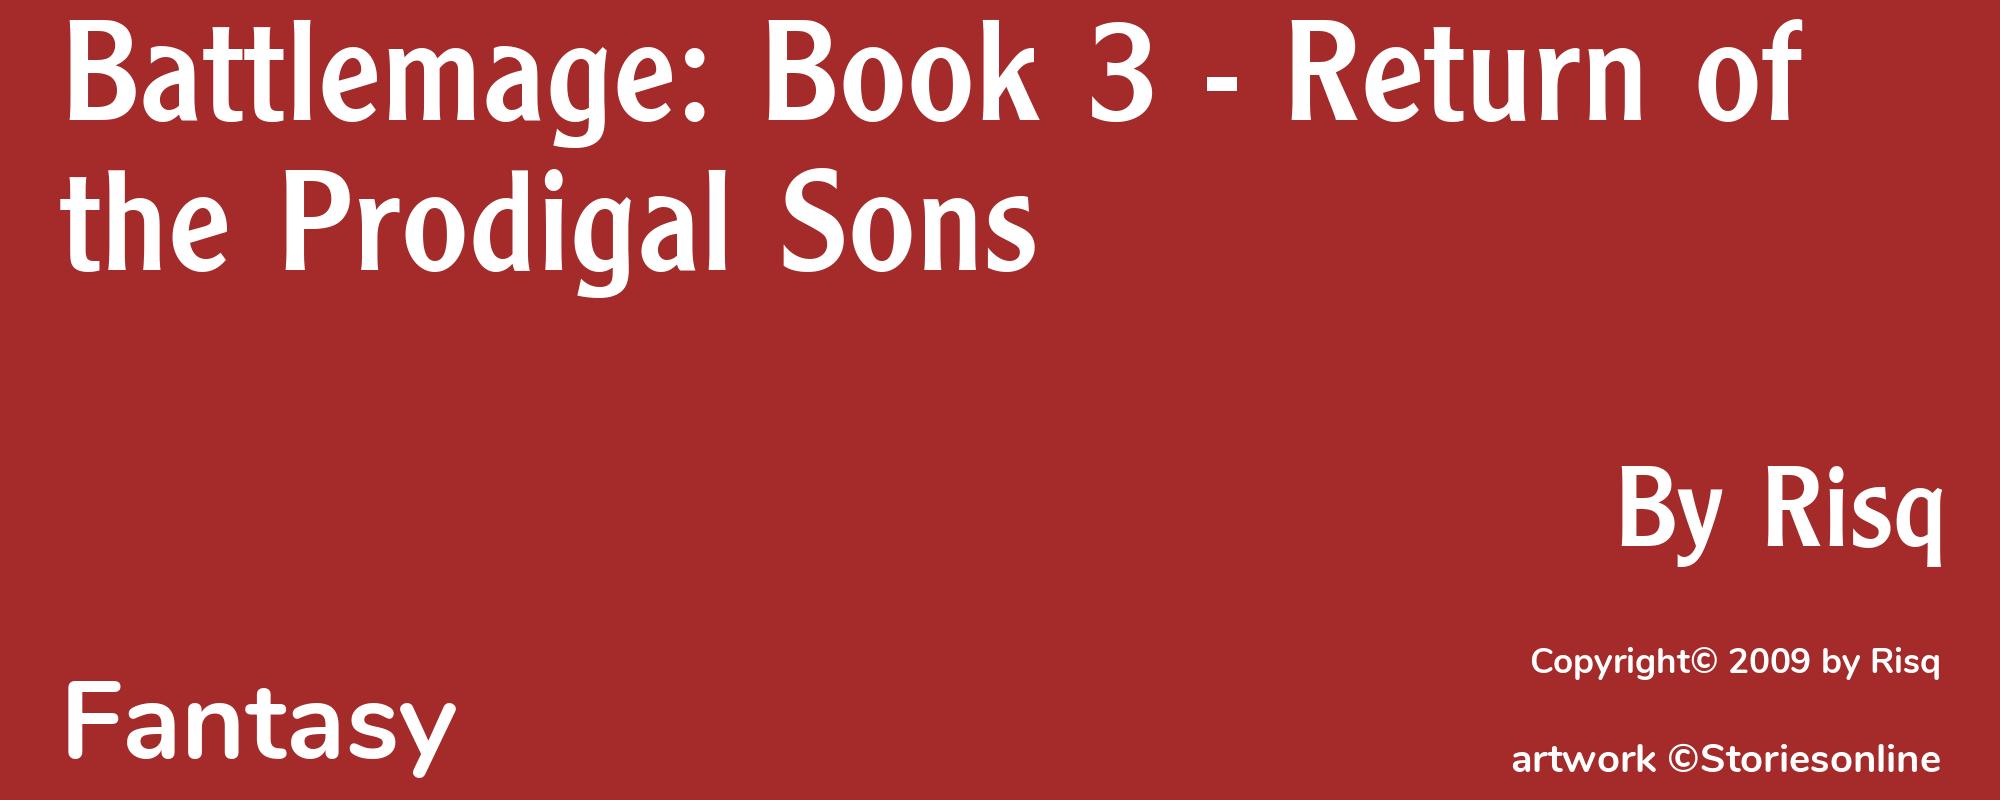 Battlemage: Book 3 - Return of the Prodigal Sons - Cover